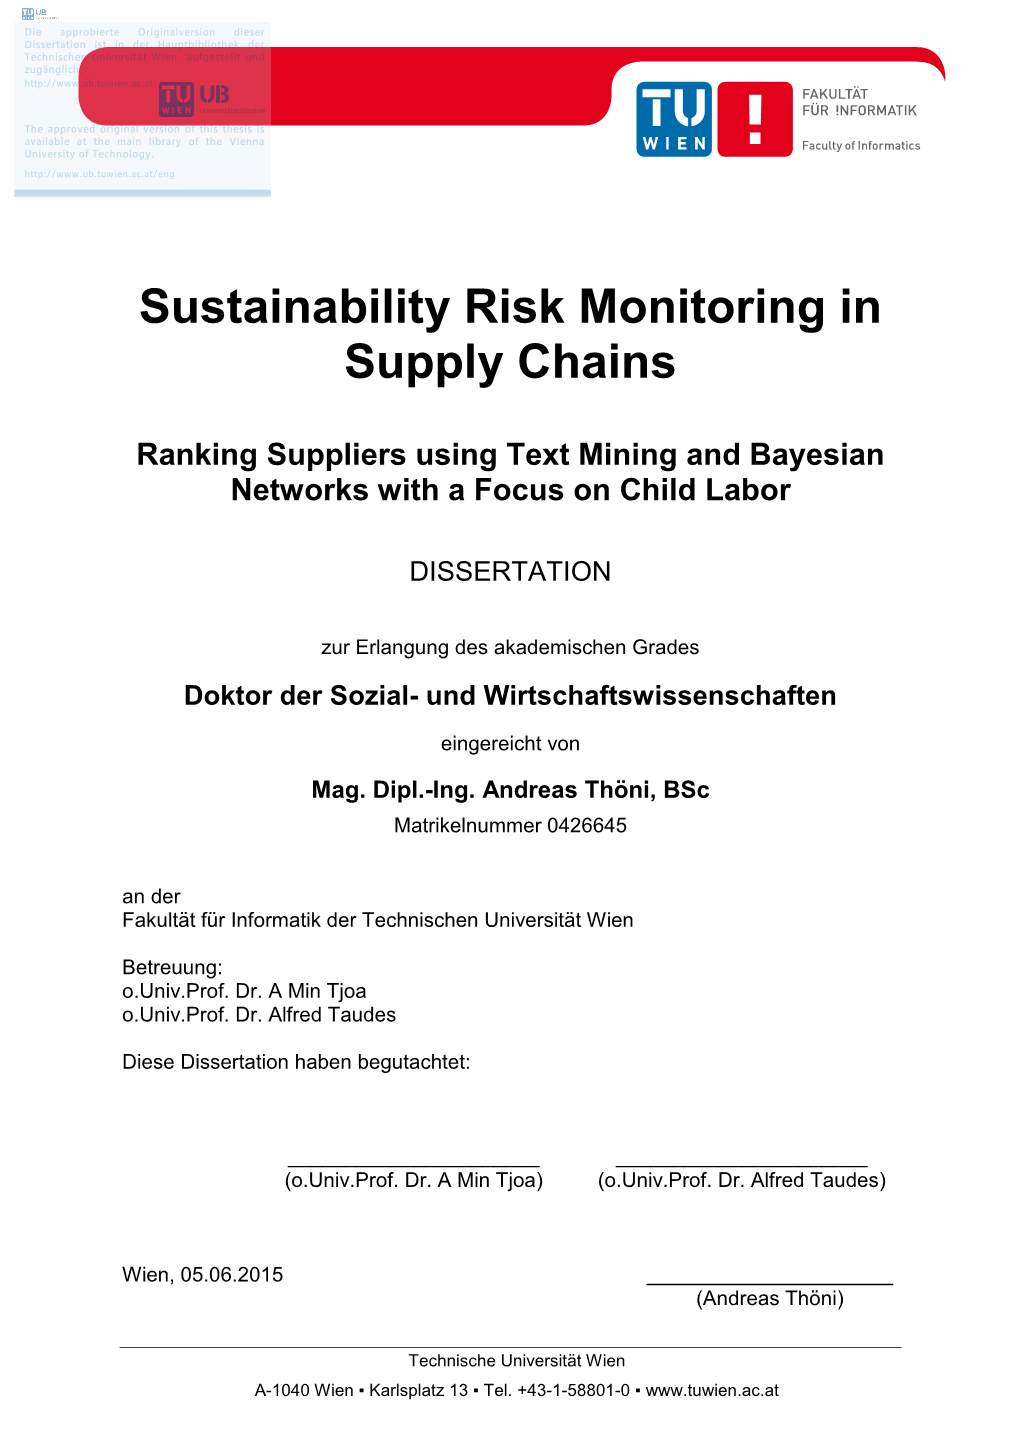 Sustainability Risk Monitoring in Supply Chains